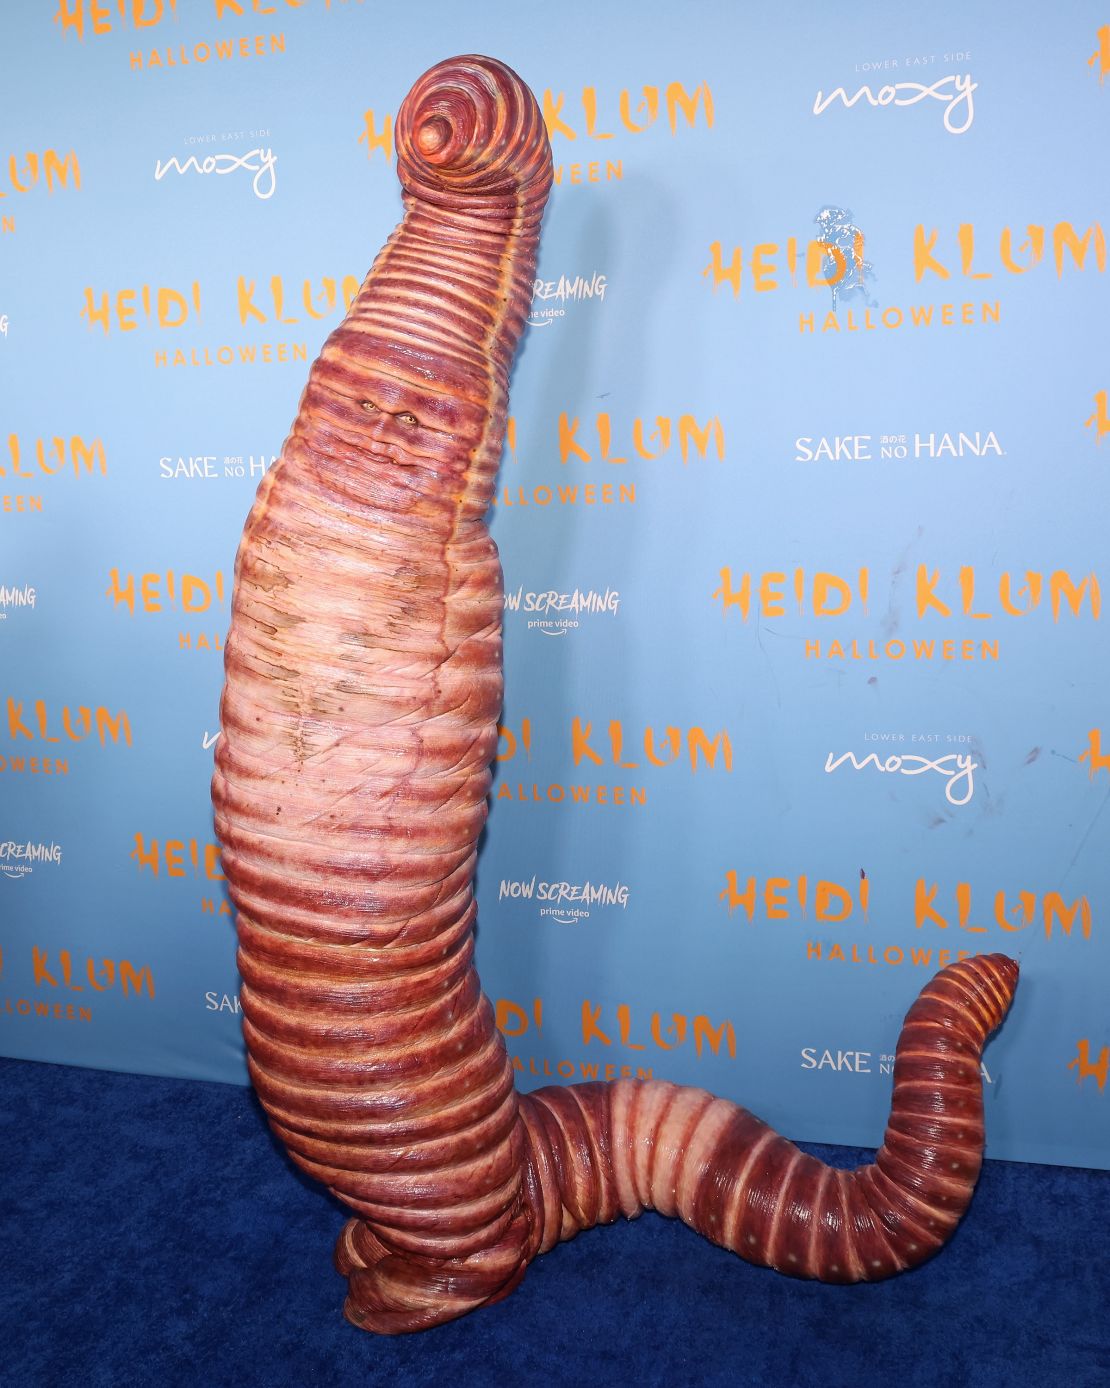 Heidi Klum attended her renowned Halloween party dressed as a terrifying earthworm.